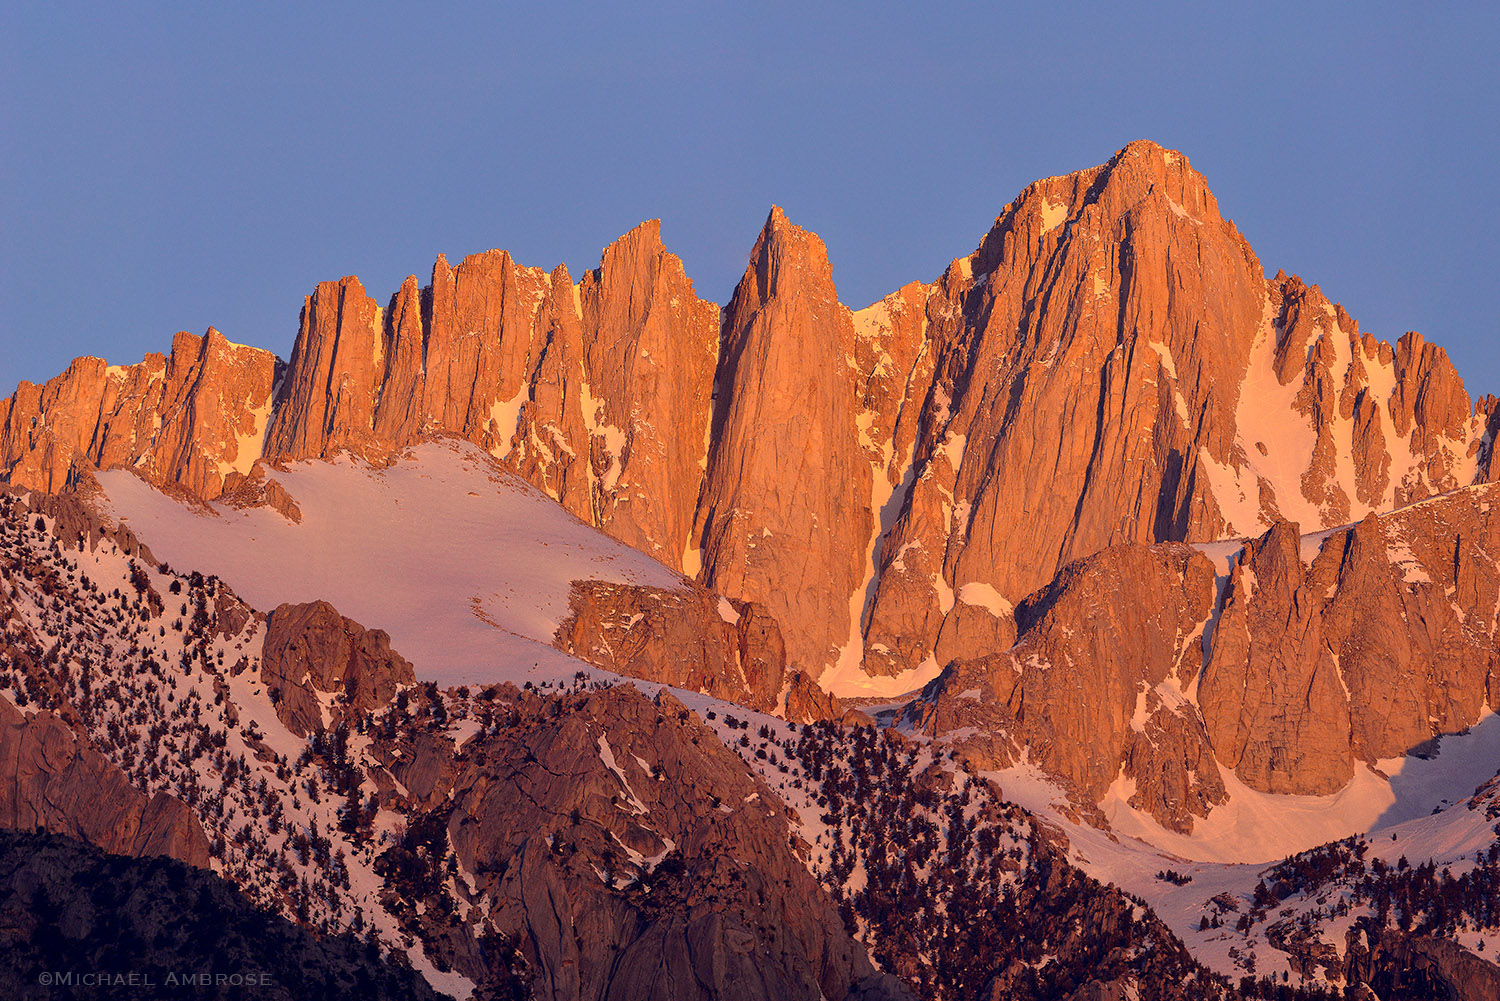 Mount Whitney Crest sunset alpenglow light and dusting of snow.